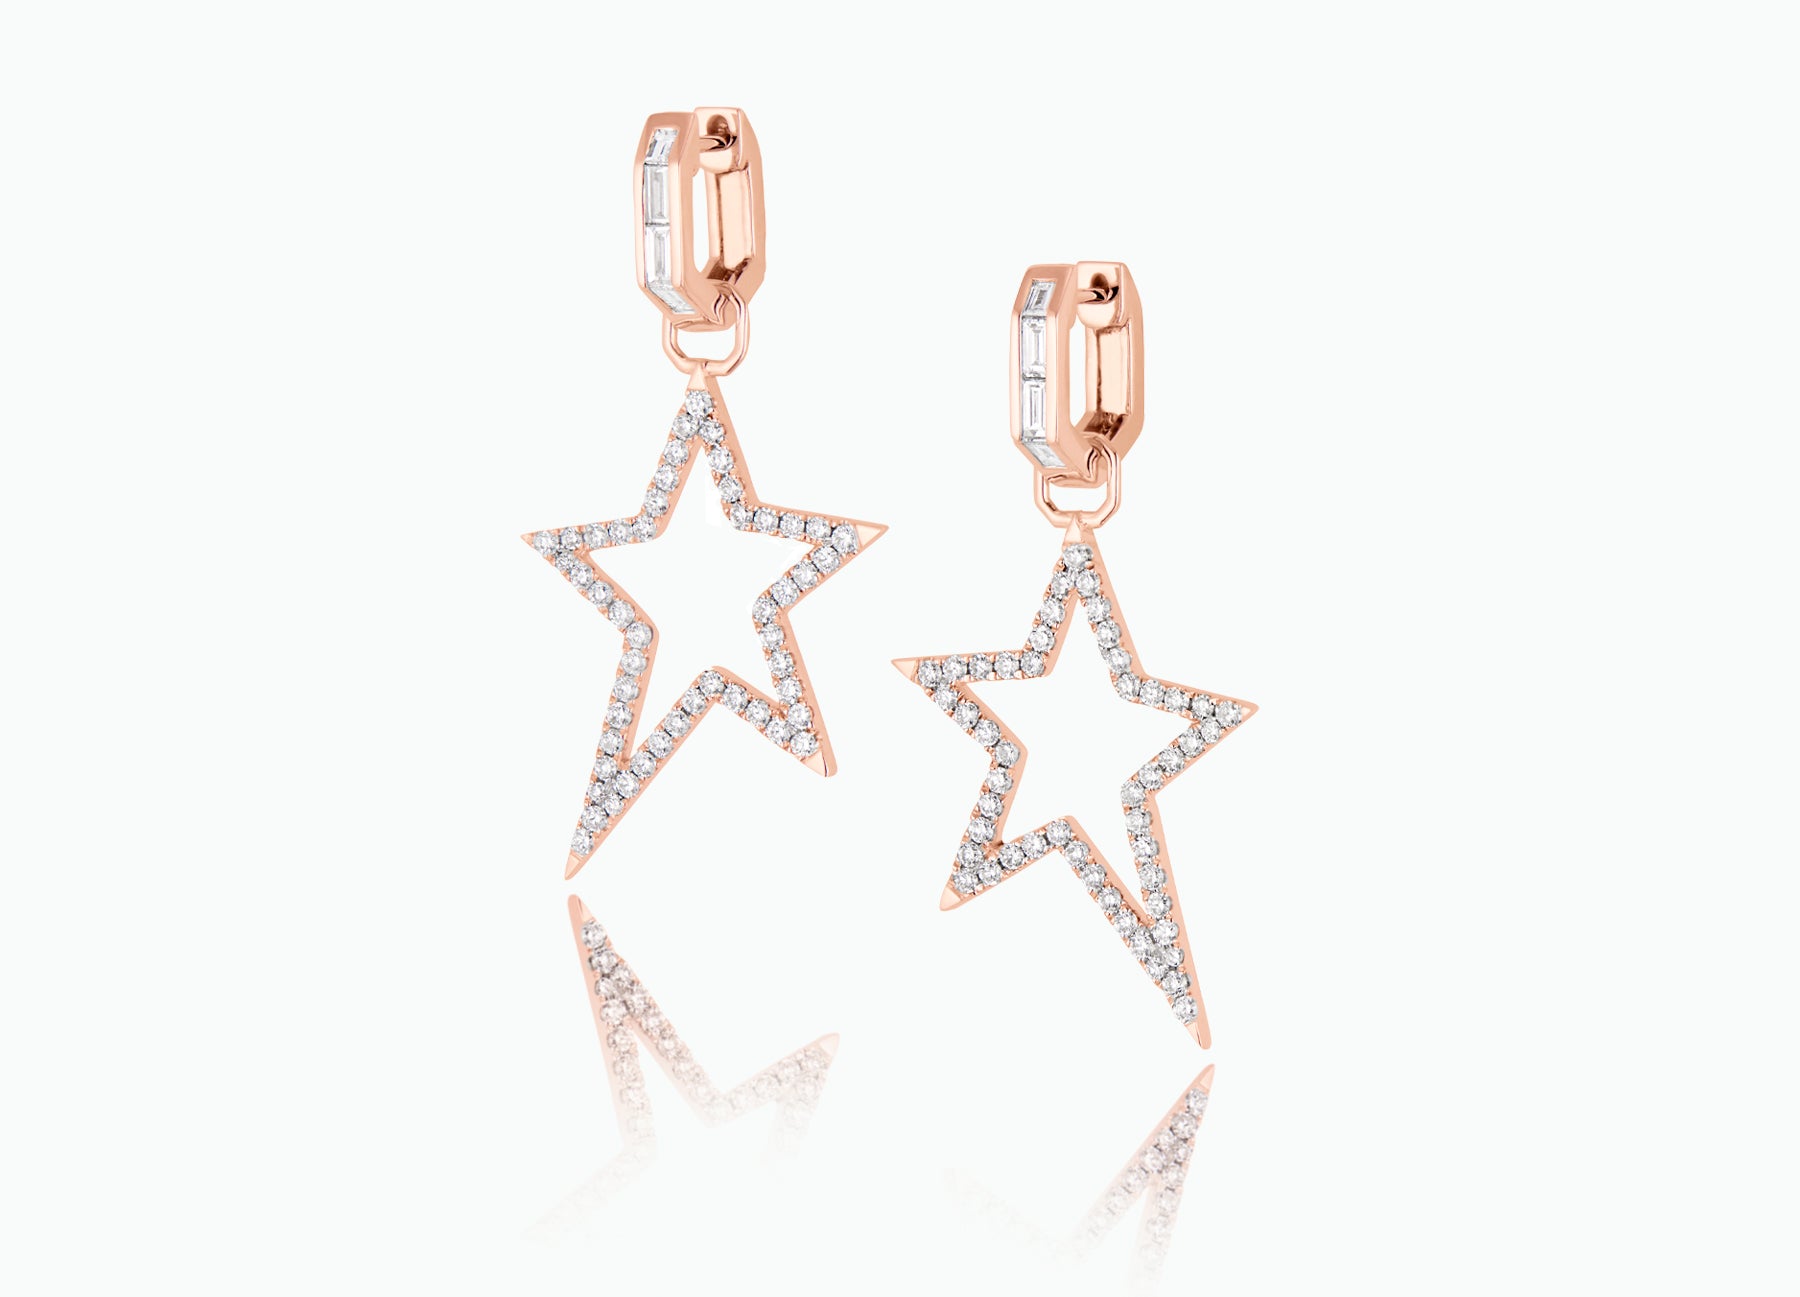 Huggie earrings with detachable Star Extension. Made from white, rose or yellow 18k Gold with round white Diamonds.